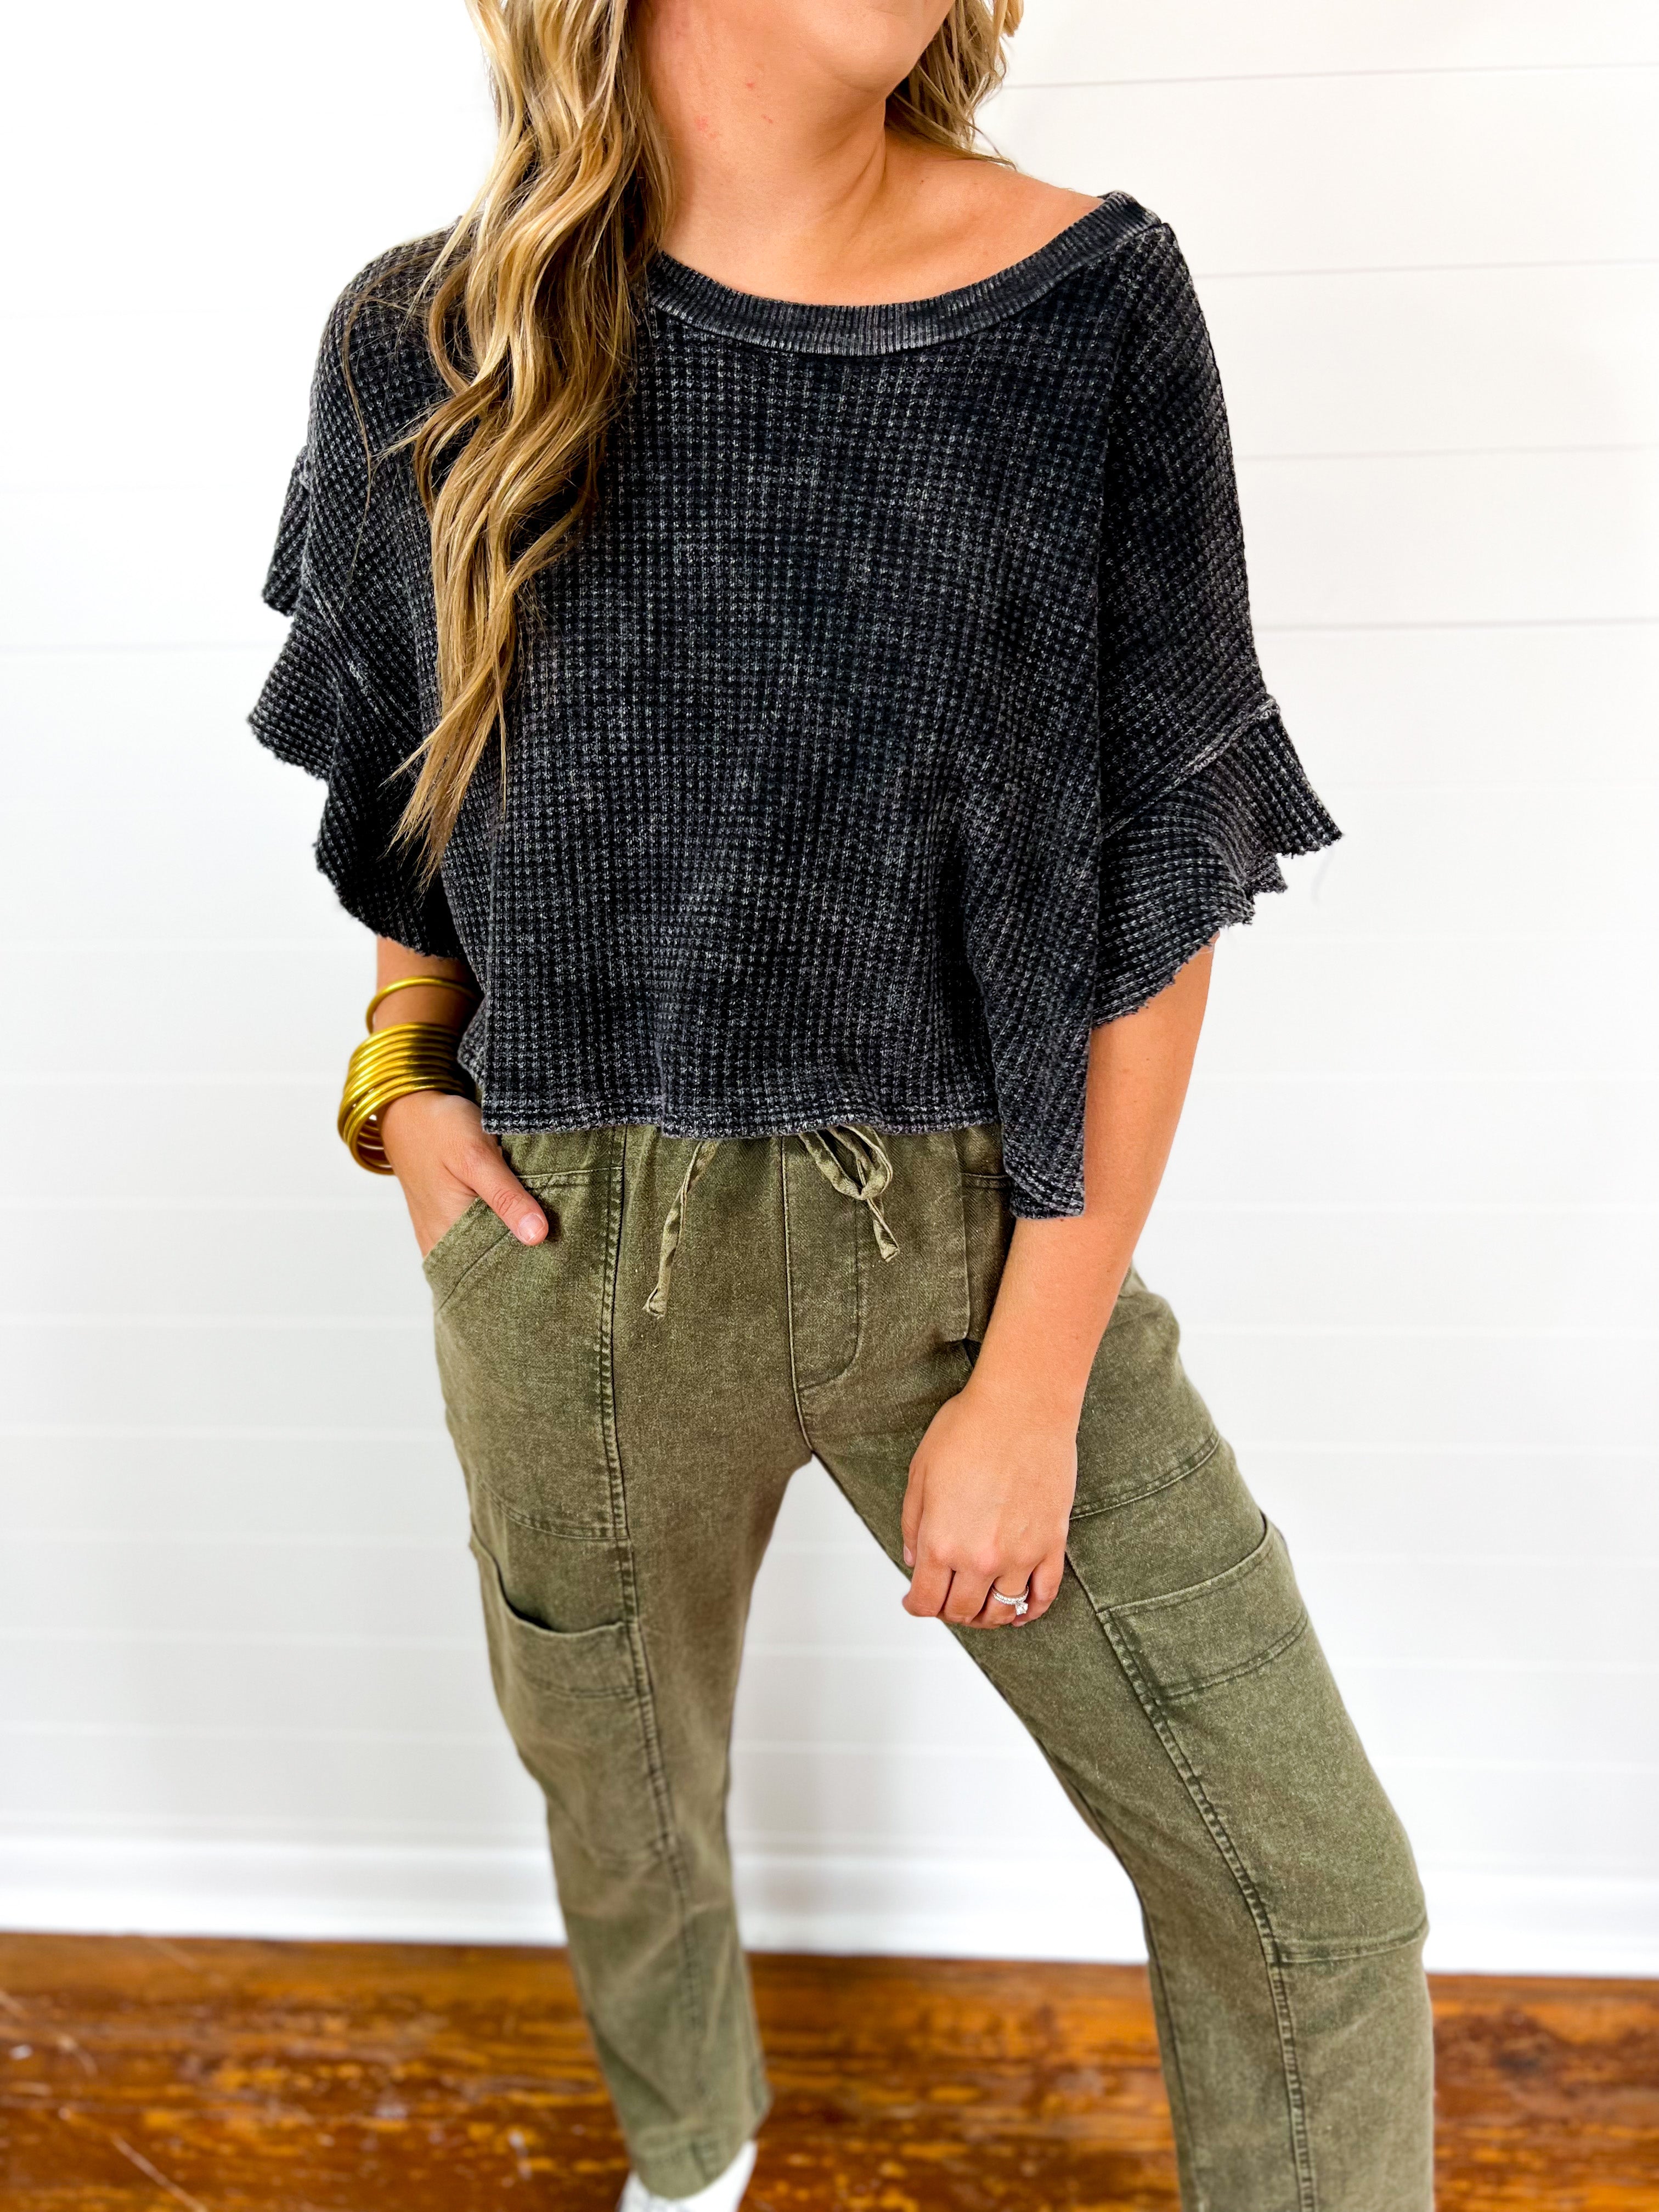 Ruffled Garment Mineral-Wash Charcoal Cropped Top